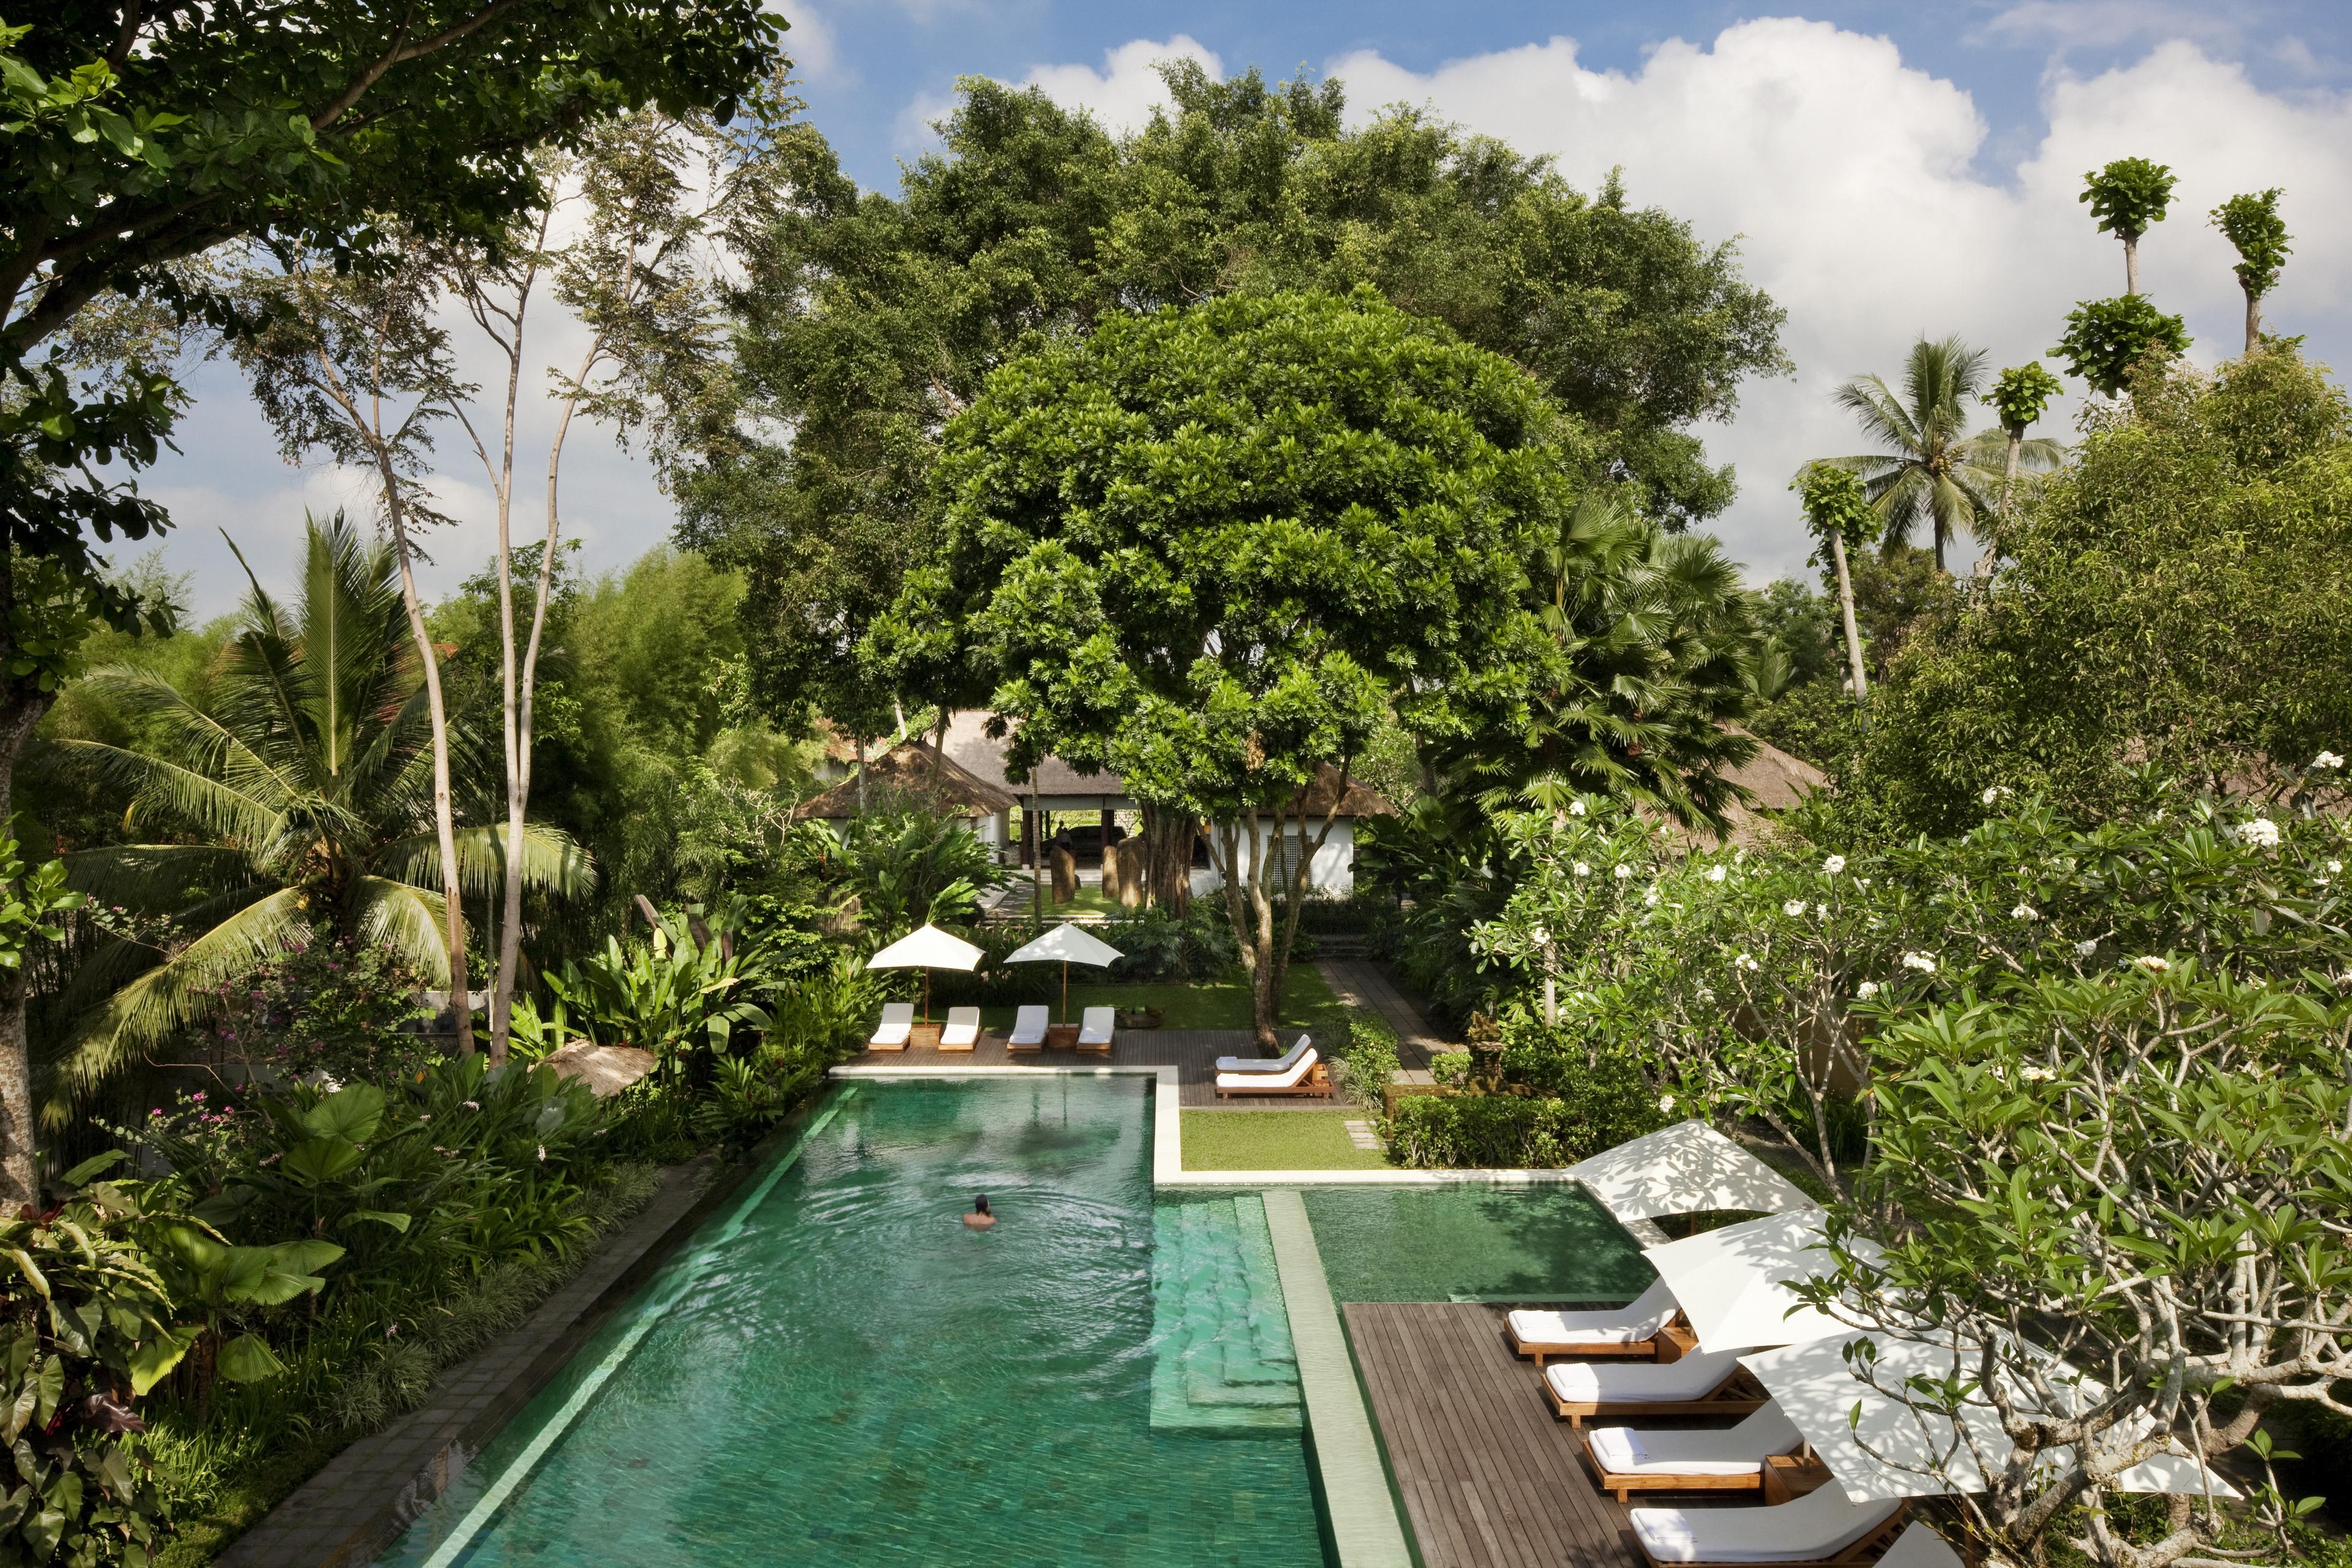 pool surrounded by chaise lounges and jungle